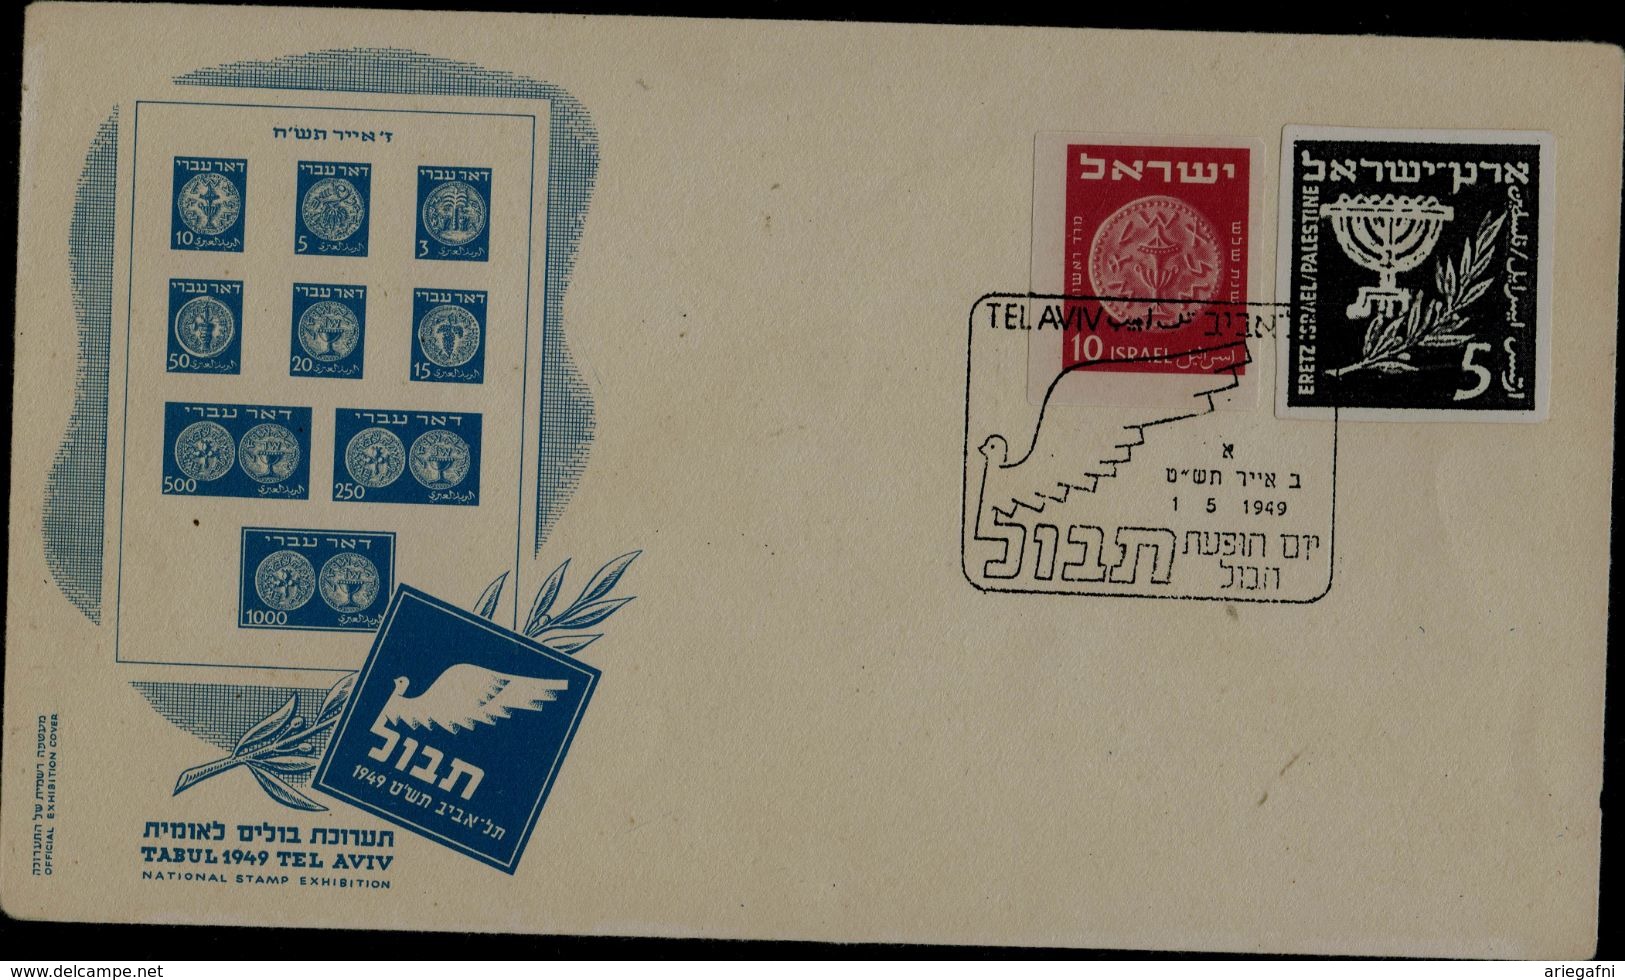 ISRAEL 1948 ESSAY PROPOSAL SUMBMITED TO THE VA`AD LE`UMI BY O.VALLISH NOT ACCEPTED STUCK ON CARDBOARD BALLE-8000$ VR!! - Imperforates, Proofs & Errors